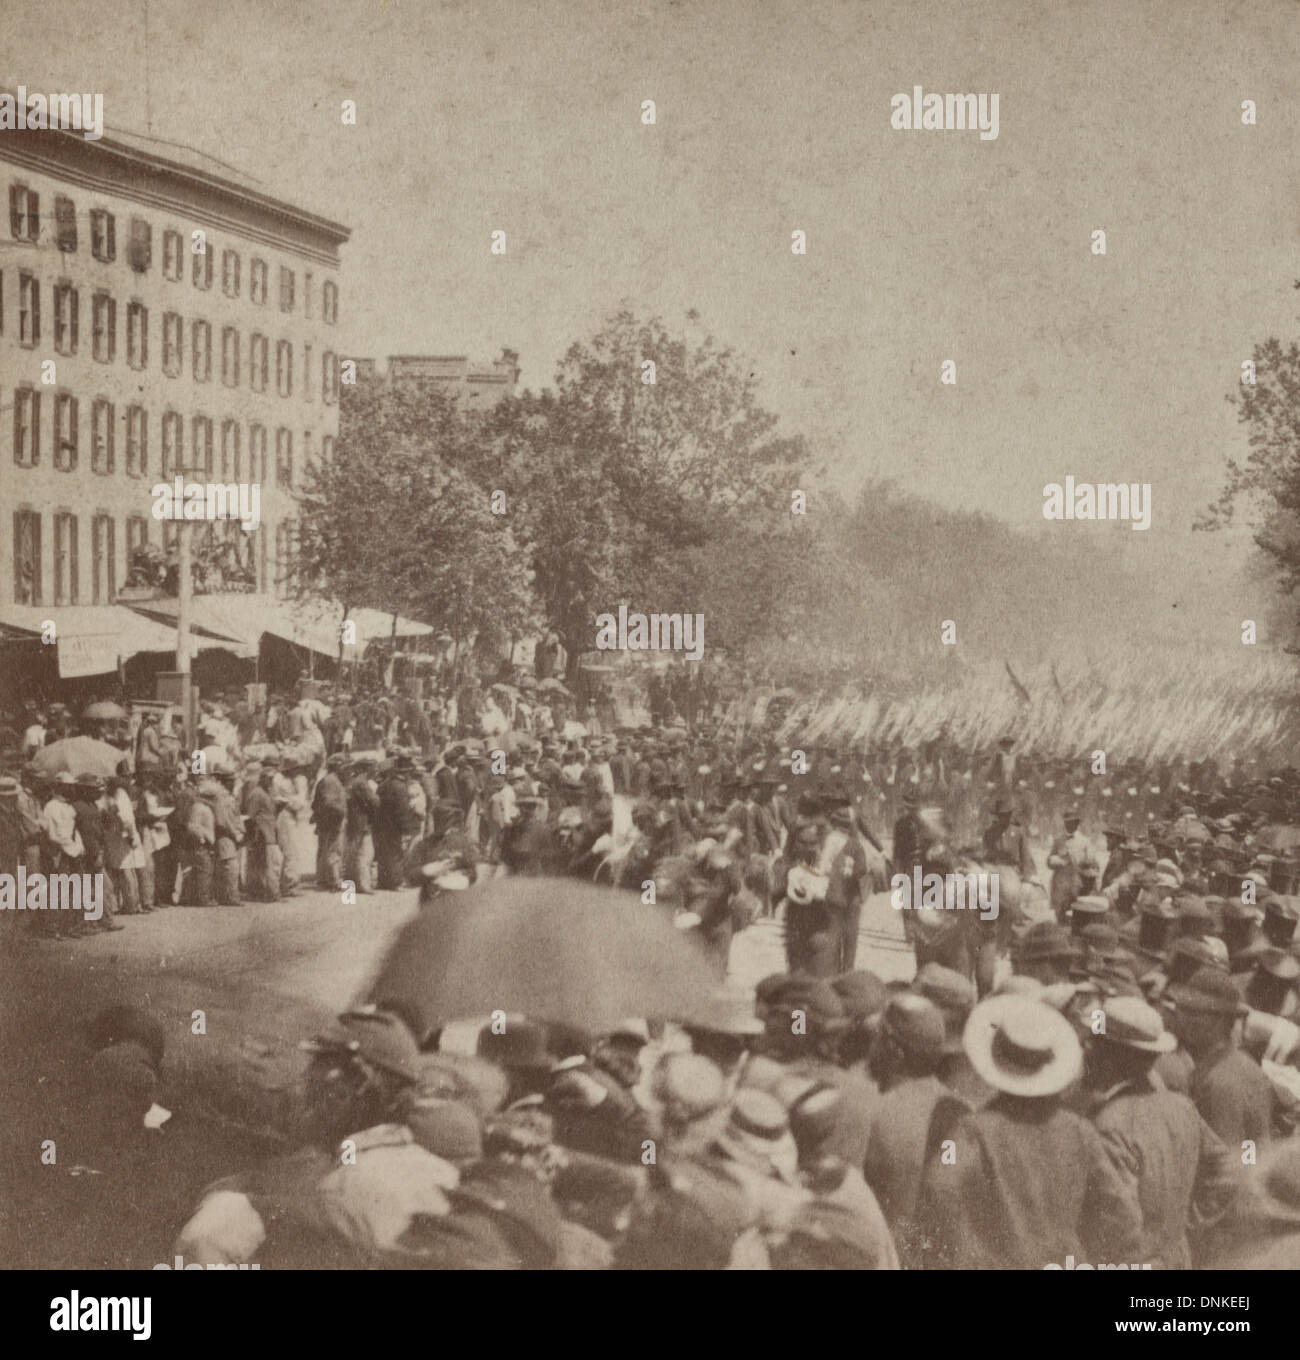 Crowds watching the Grand Review of the Union Army on Pennsylvania Avenue, Washington, D.C., May 23-24, 1865. Stock Photo